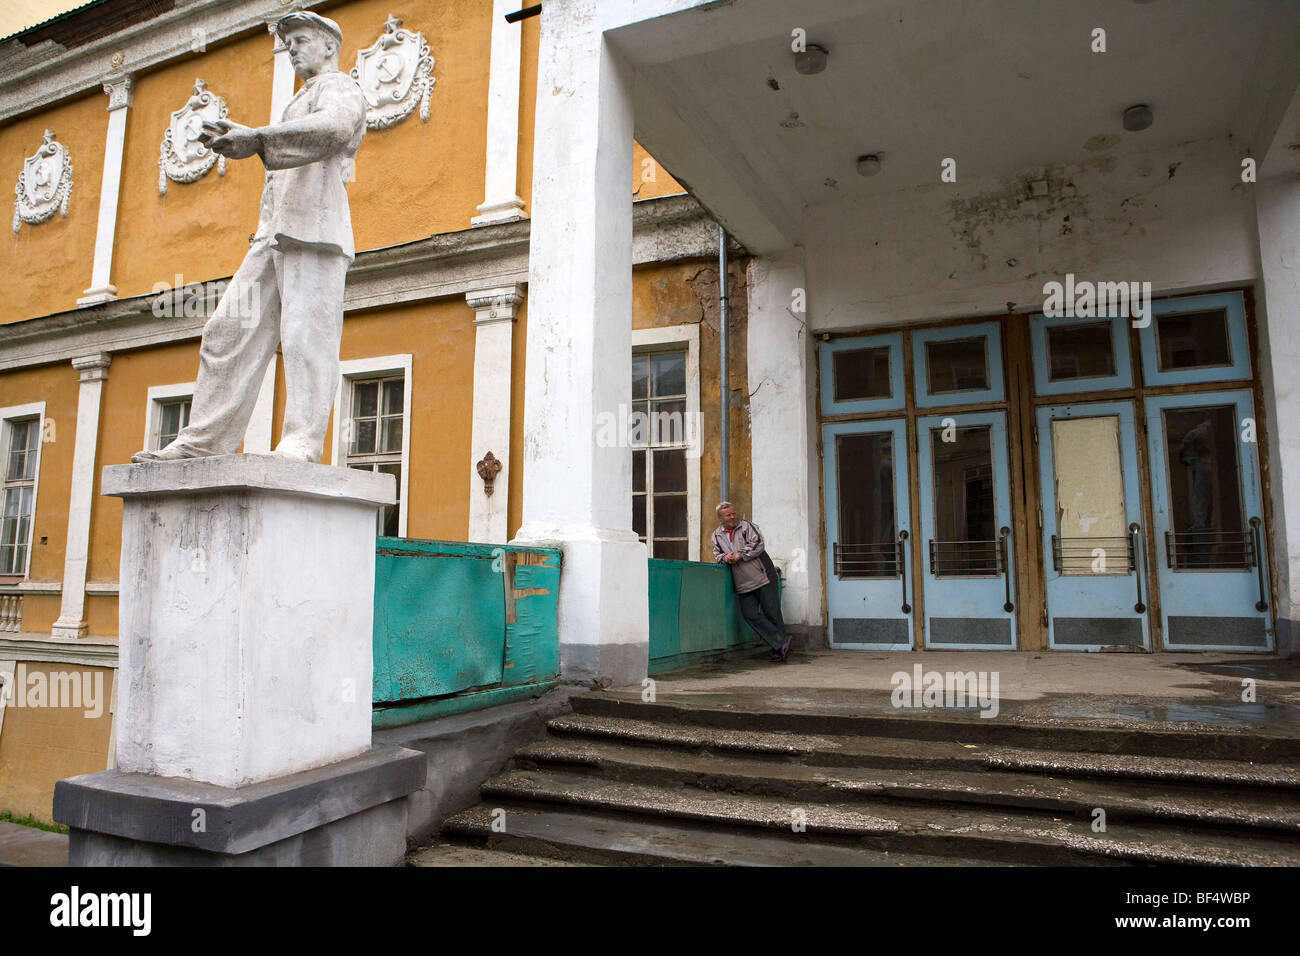 Man at entrance of neglected soviet civic building, Urals, Russia. Stock Photo